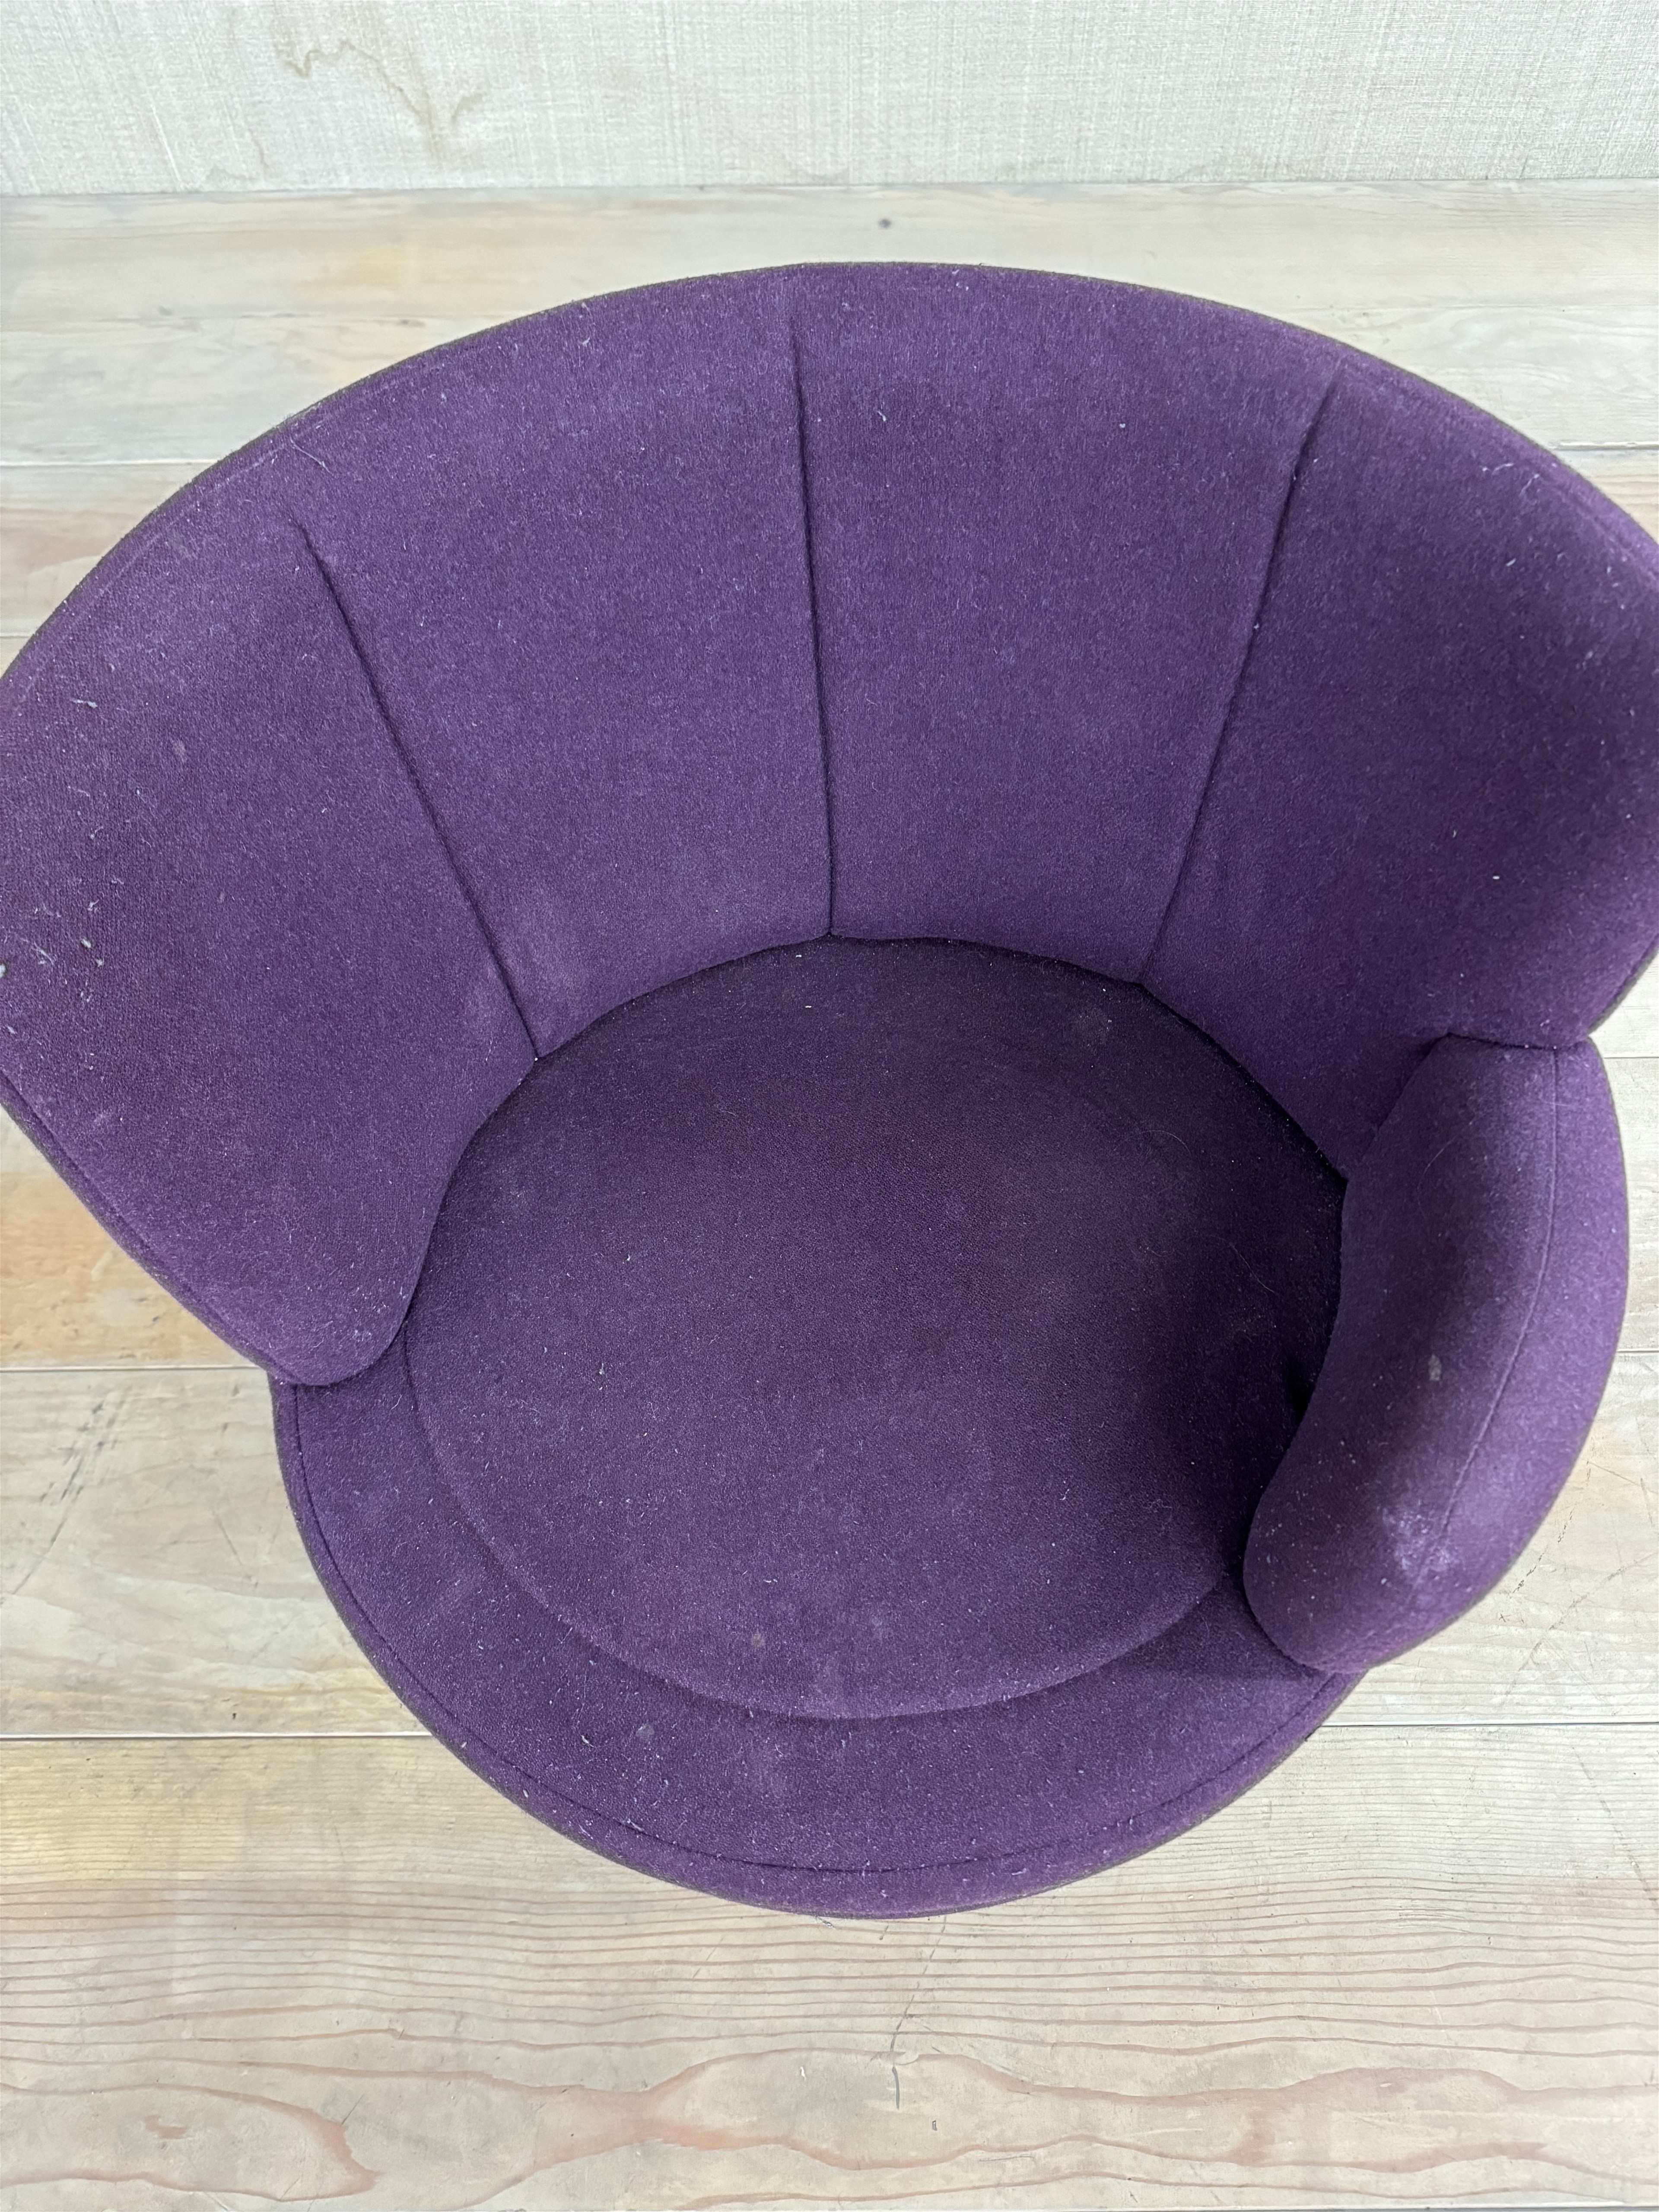 a purple chair sitting on top of a wooden floor